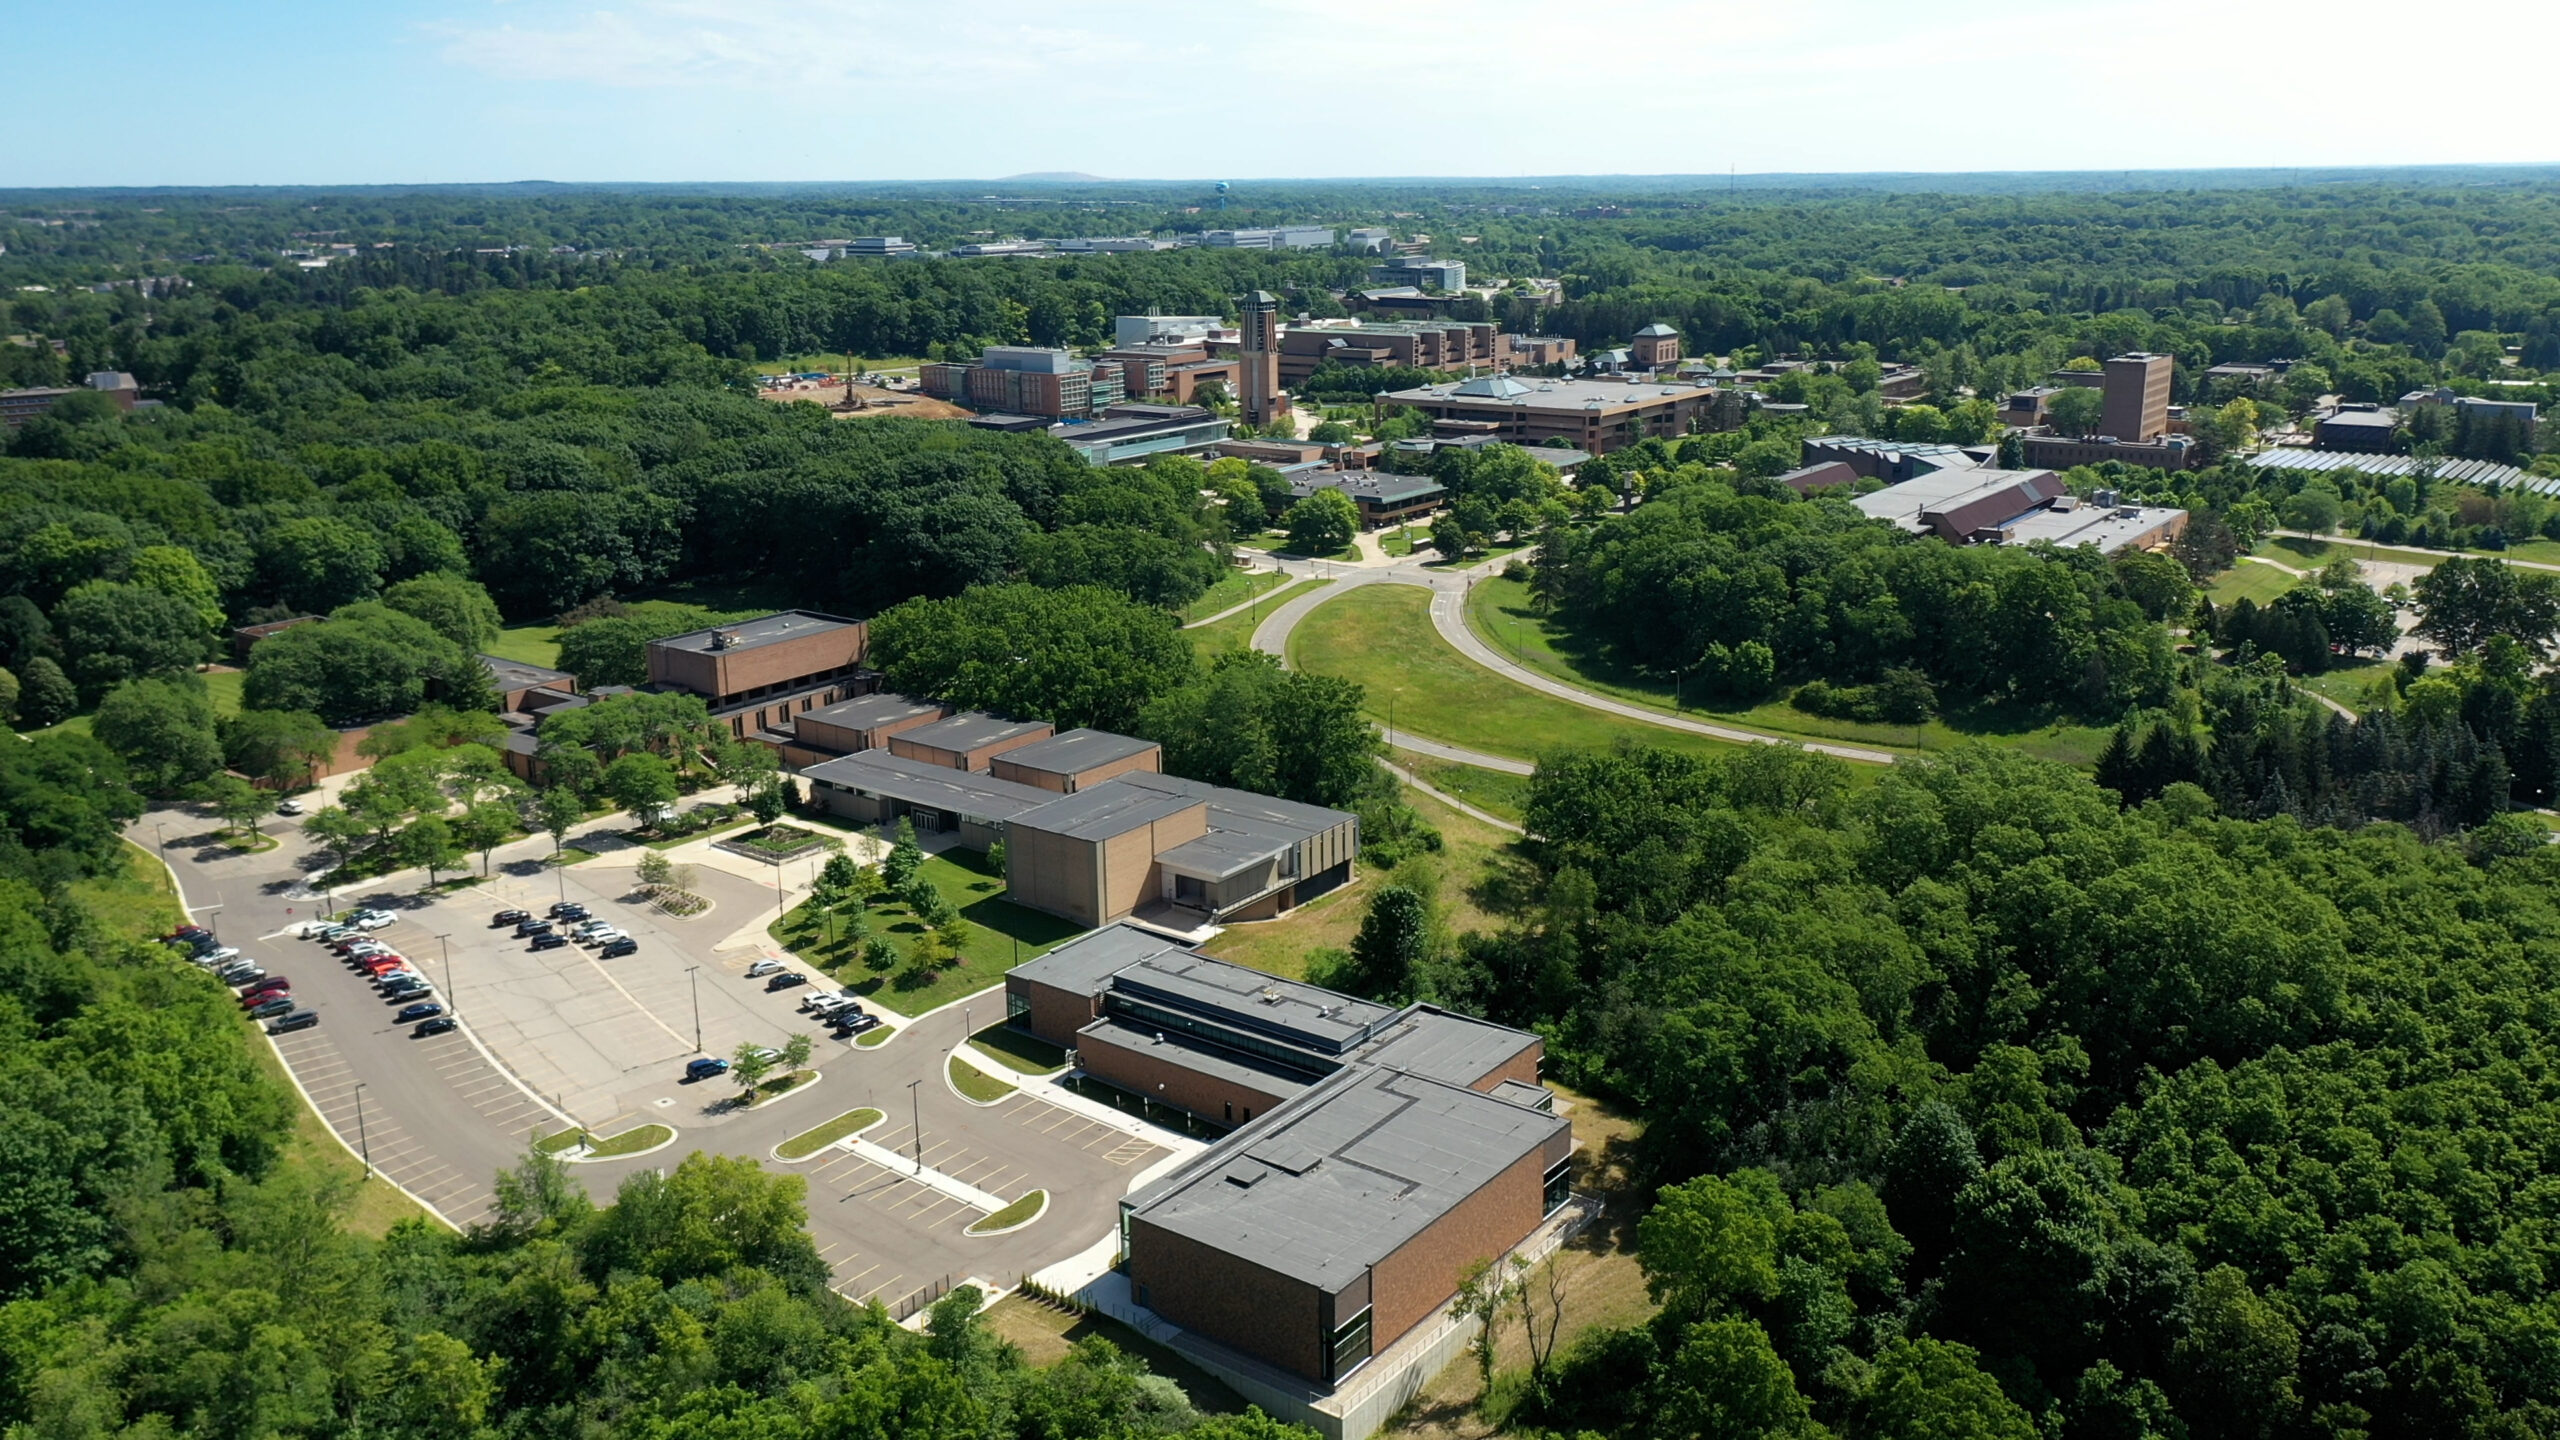 An aerial view of the University of Michigan's North Campus highlighting the new Dance Building, the Earl V. Moore Building, and the wider North Campus community